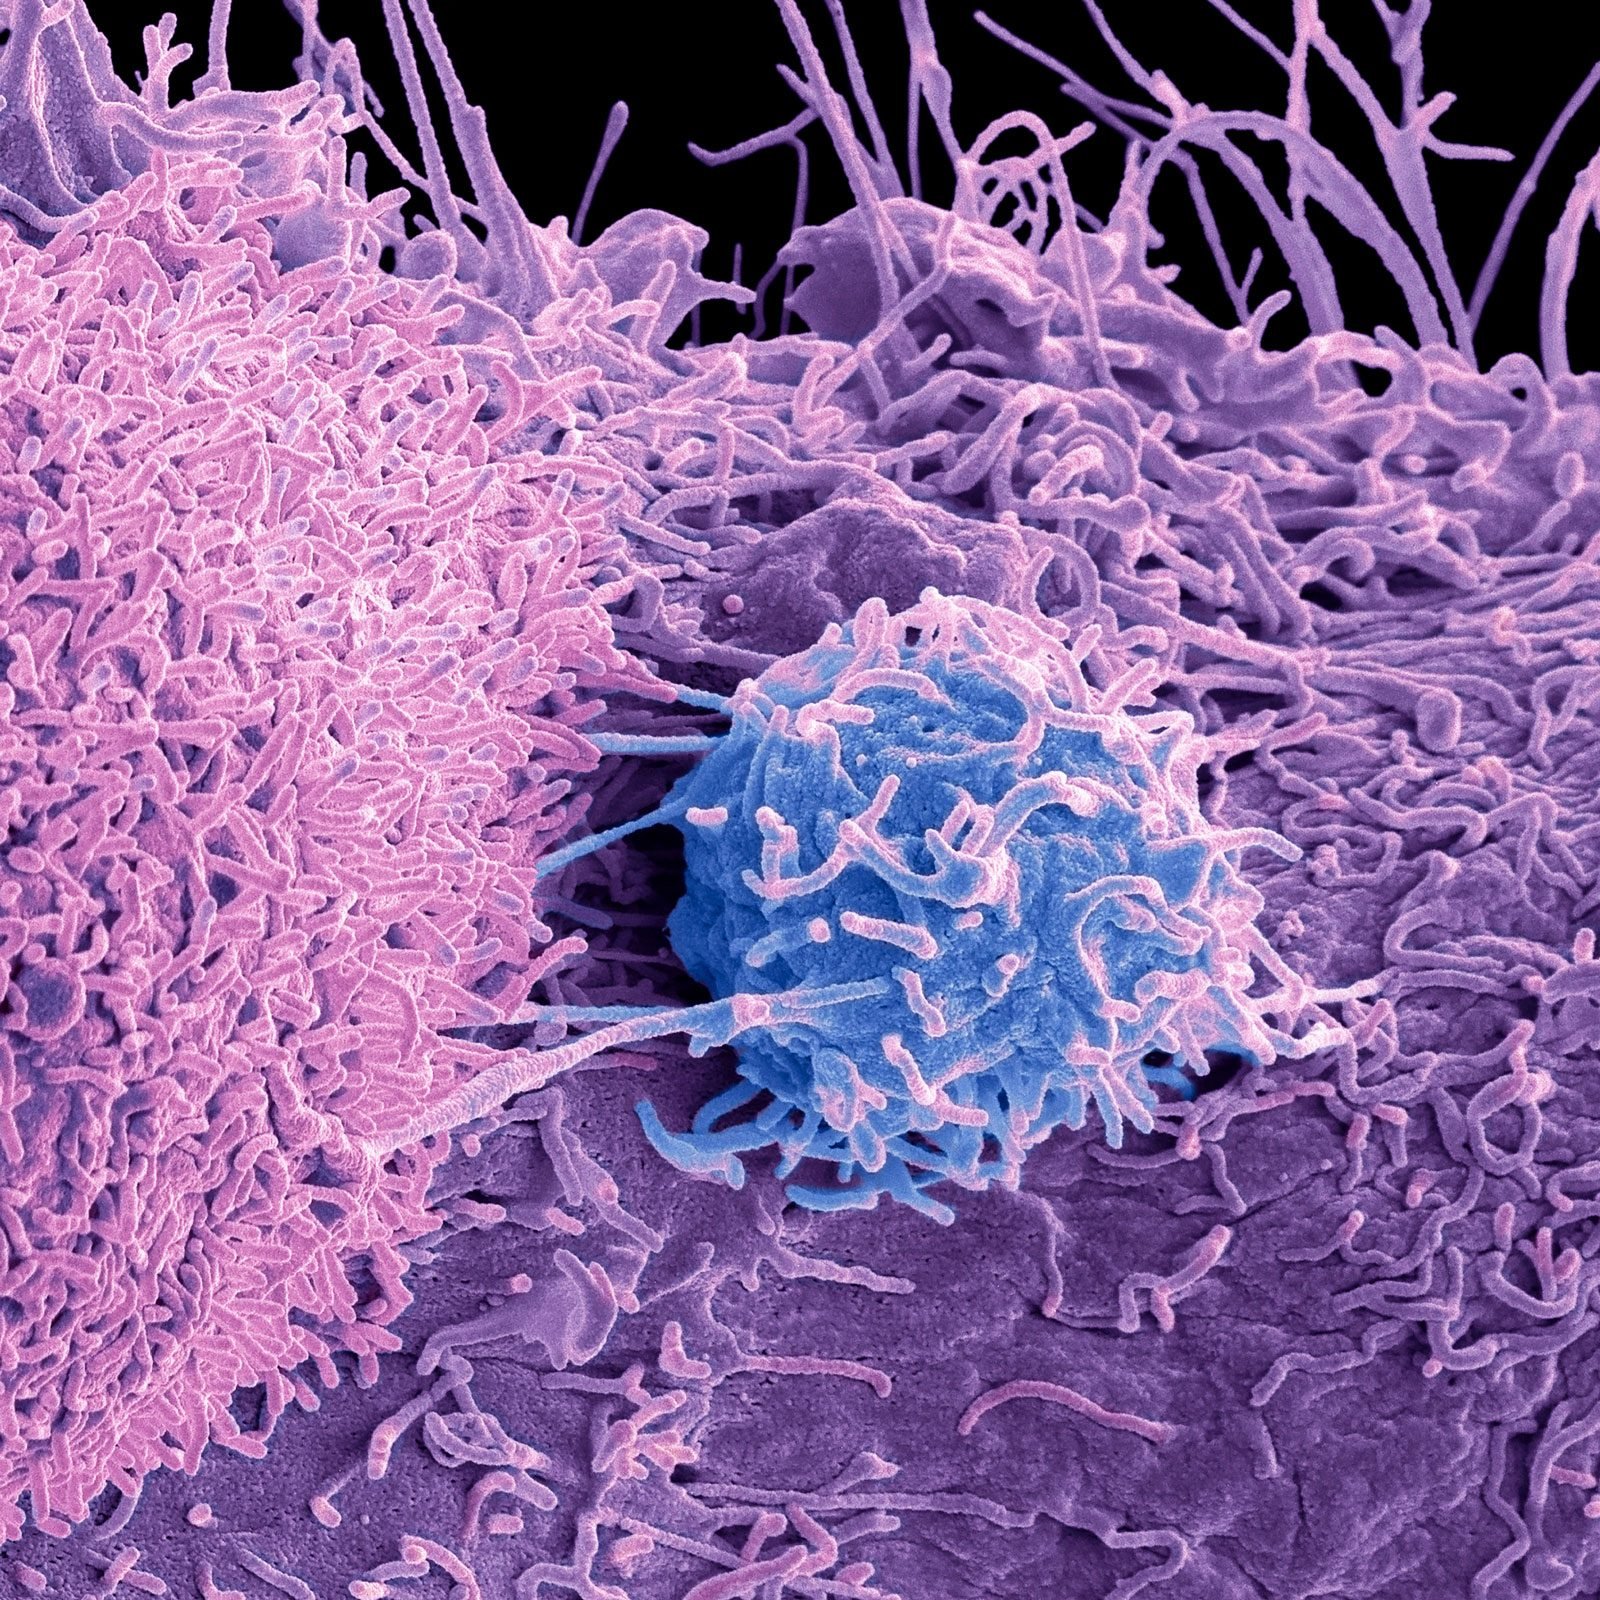 "Here's How I Knew I Had Prostate Cancer": One Patient's Story of Abruptly Elevated Markers